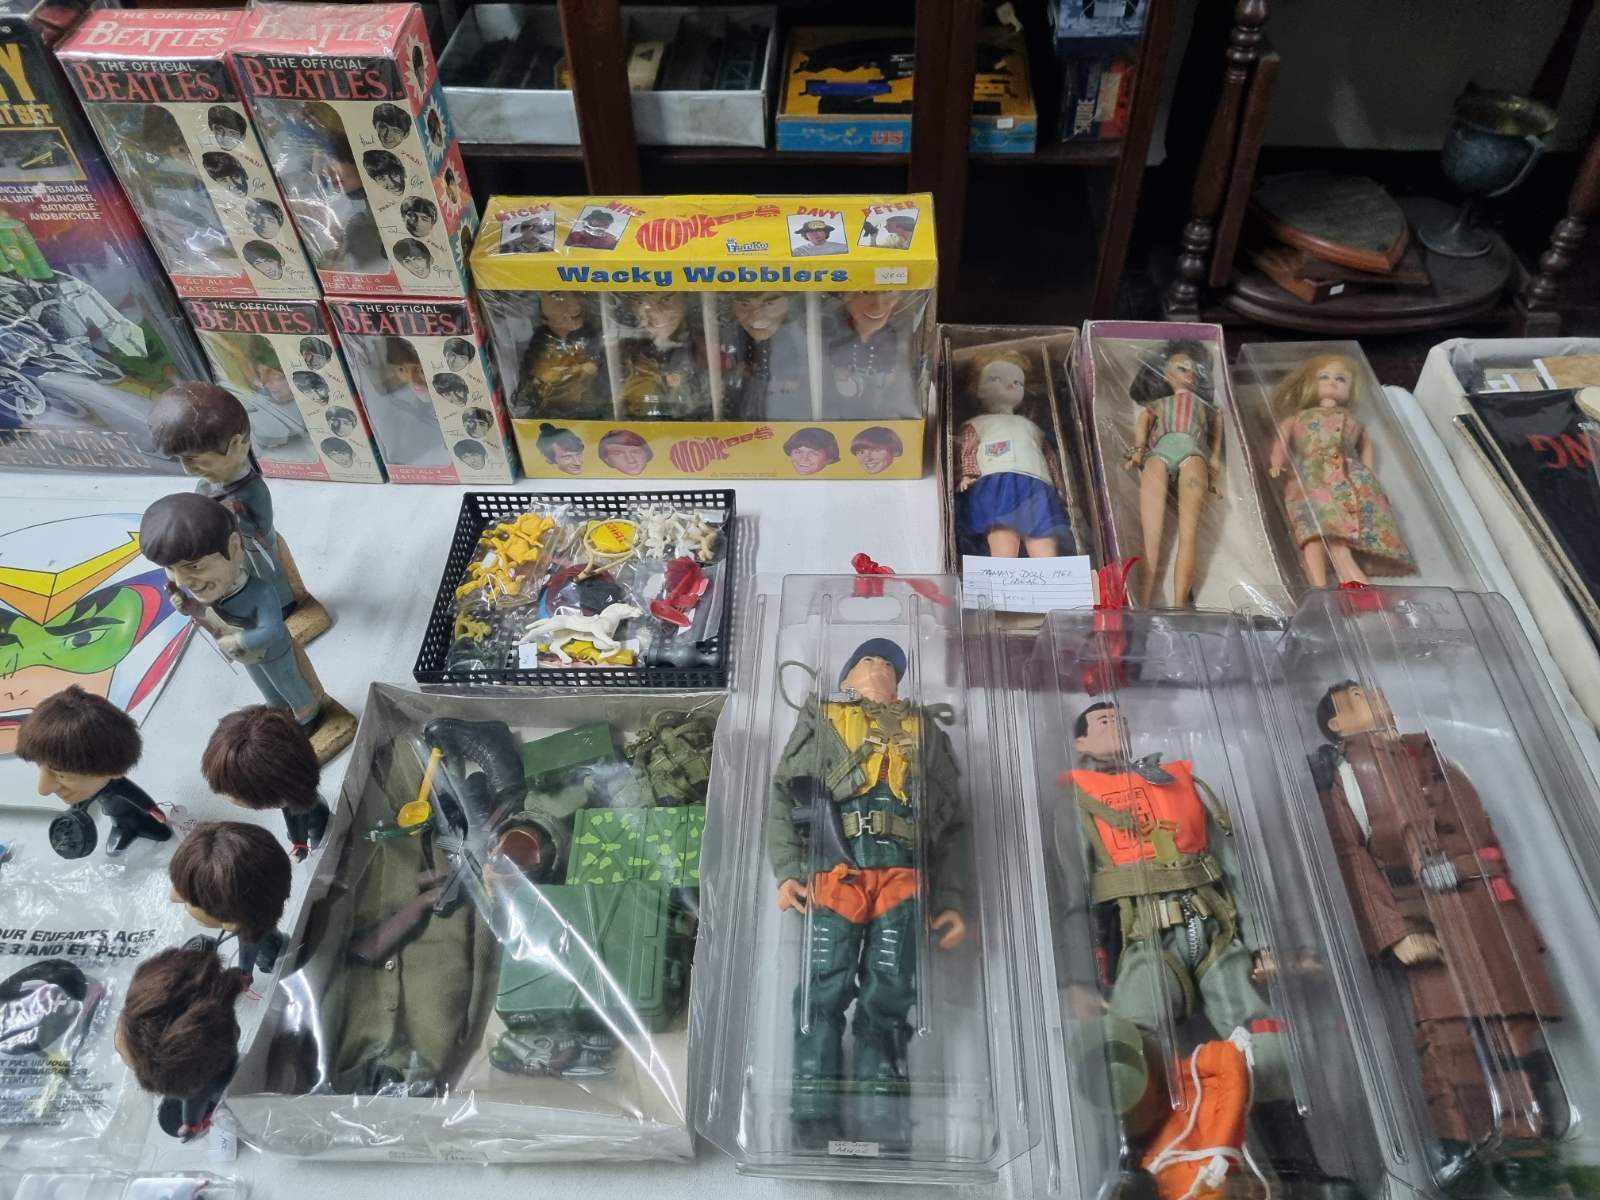 Collectibles Action figures